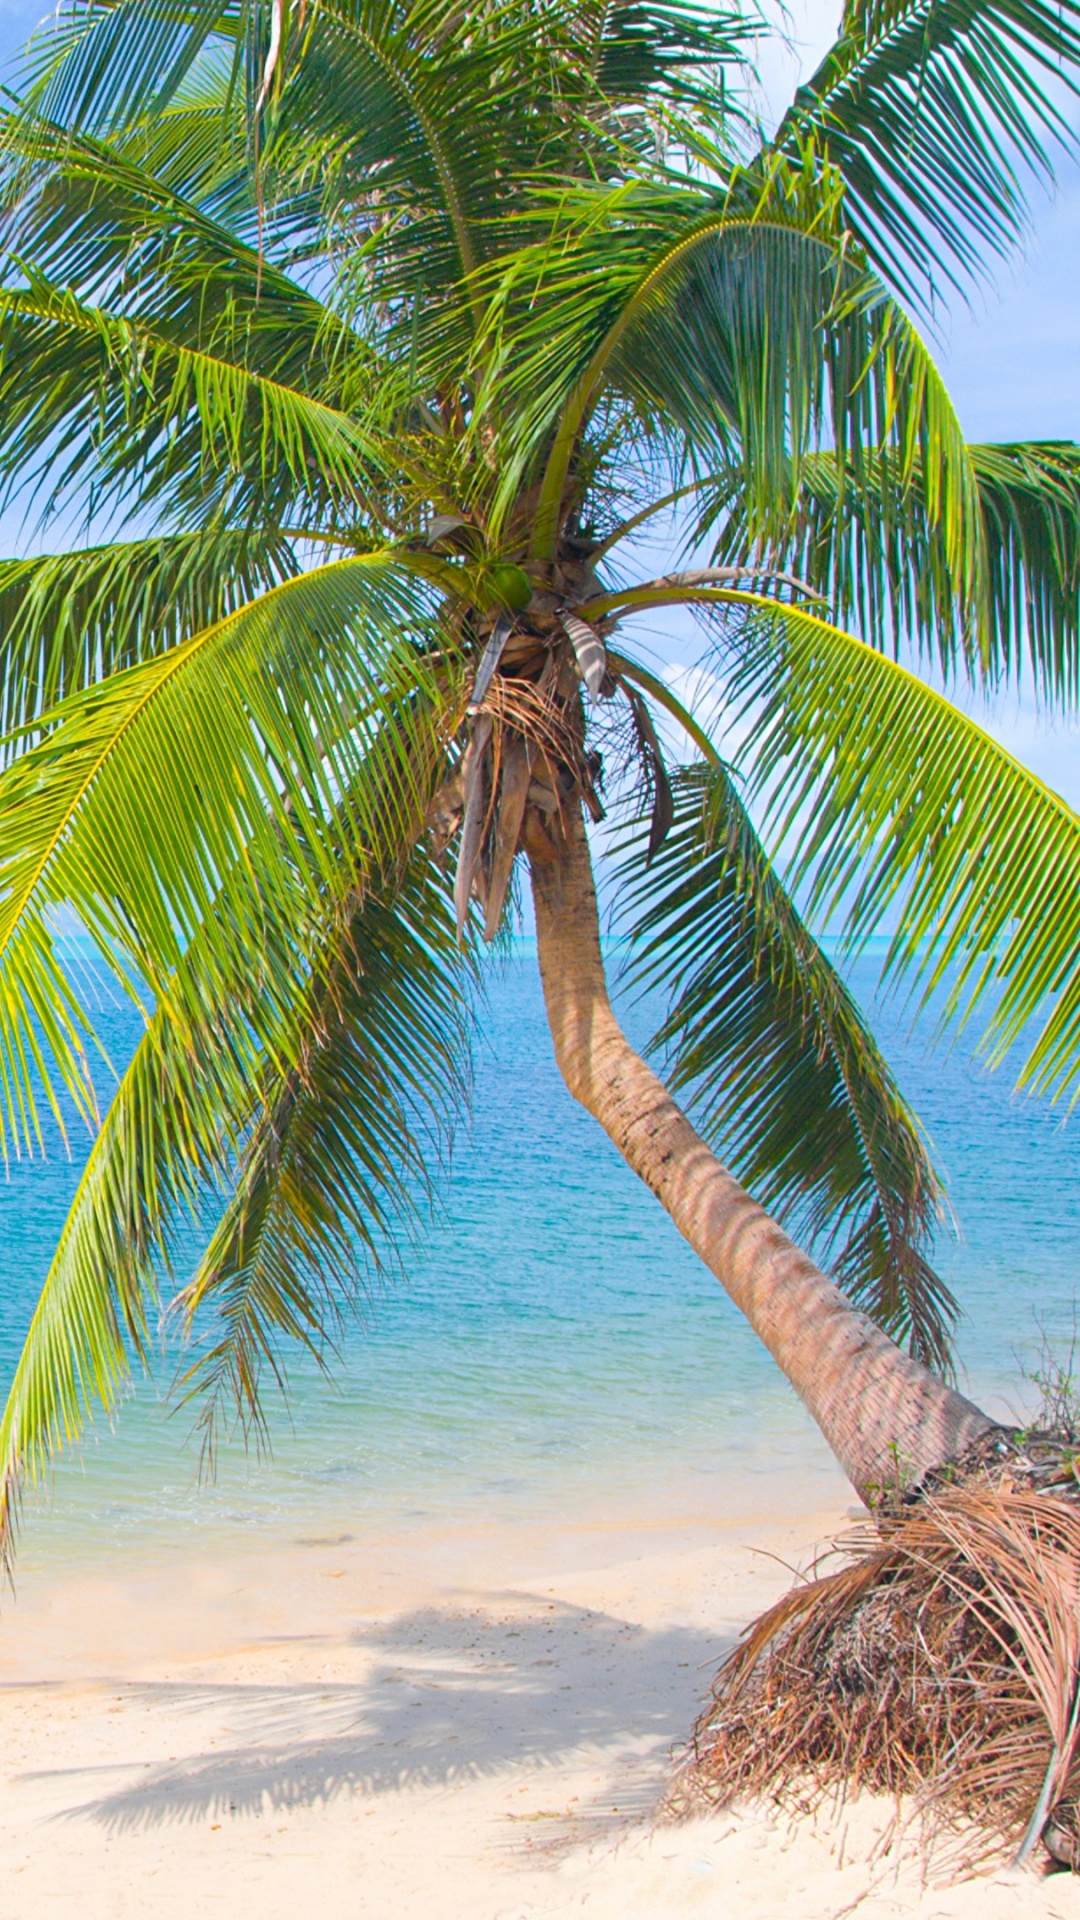 Green Palm Tree on Beach During Daytime. Wallpaper in 1080x1920 Resolution